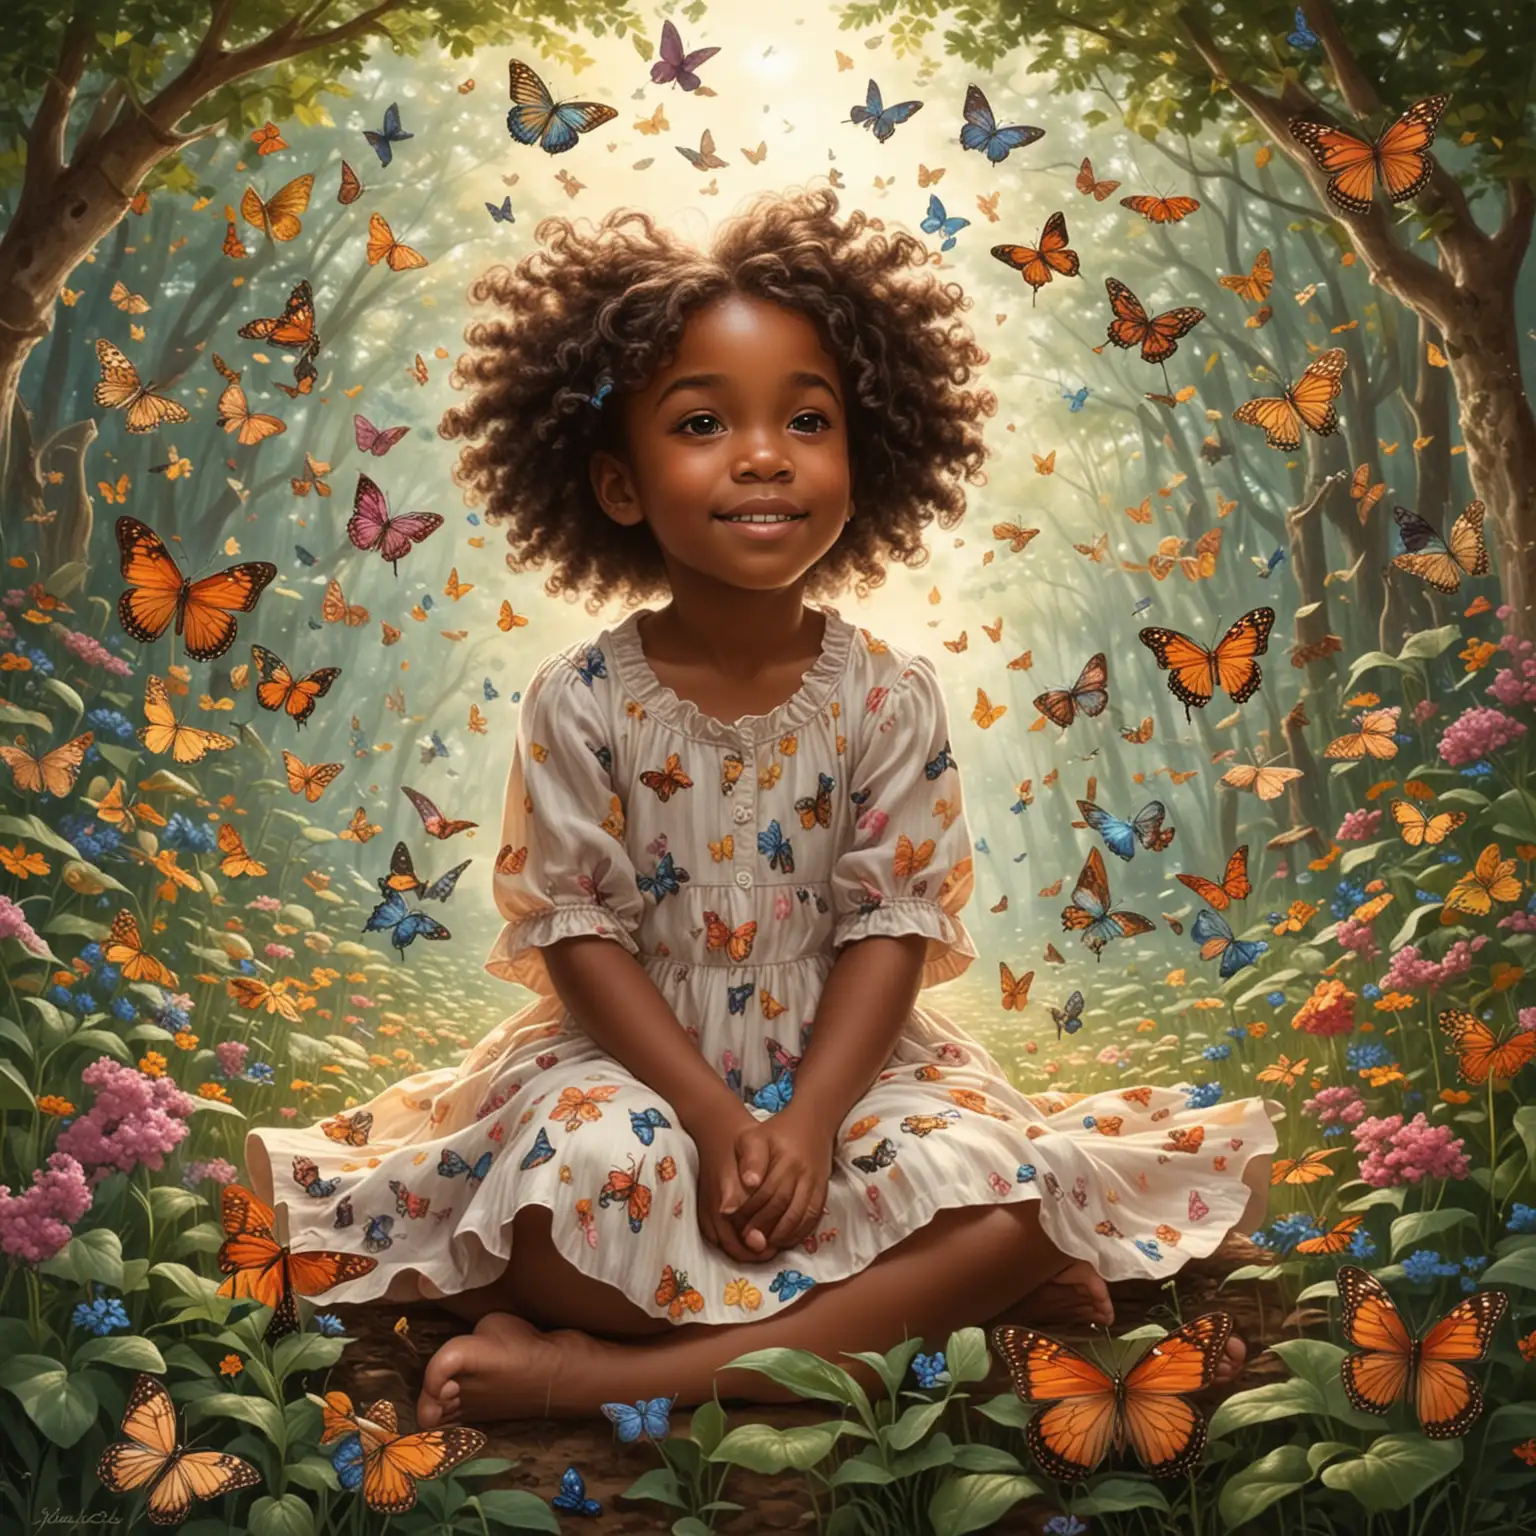 Two worlds for one has a world wind around it, and the other one has butterflies around it. World with butterflies has a African-American 10 year-old, beautiful little girl sitting on it softly playing with the butterflies.